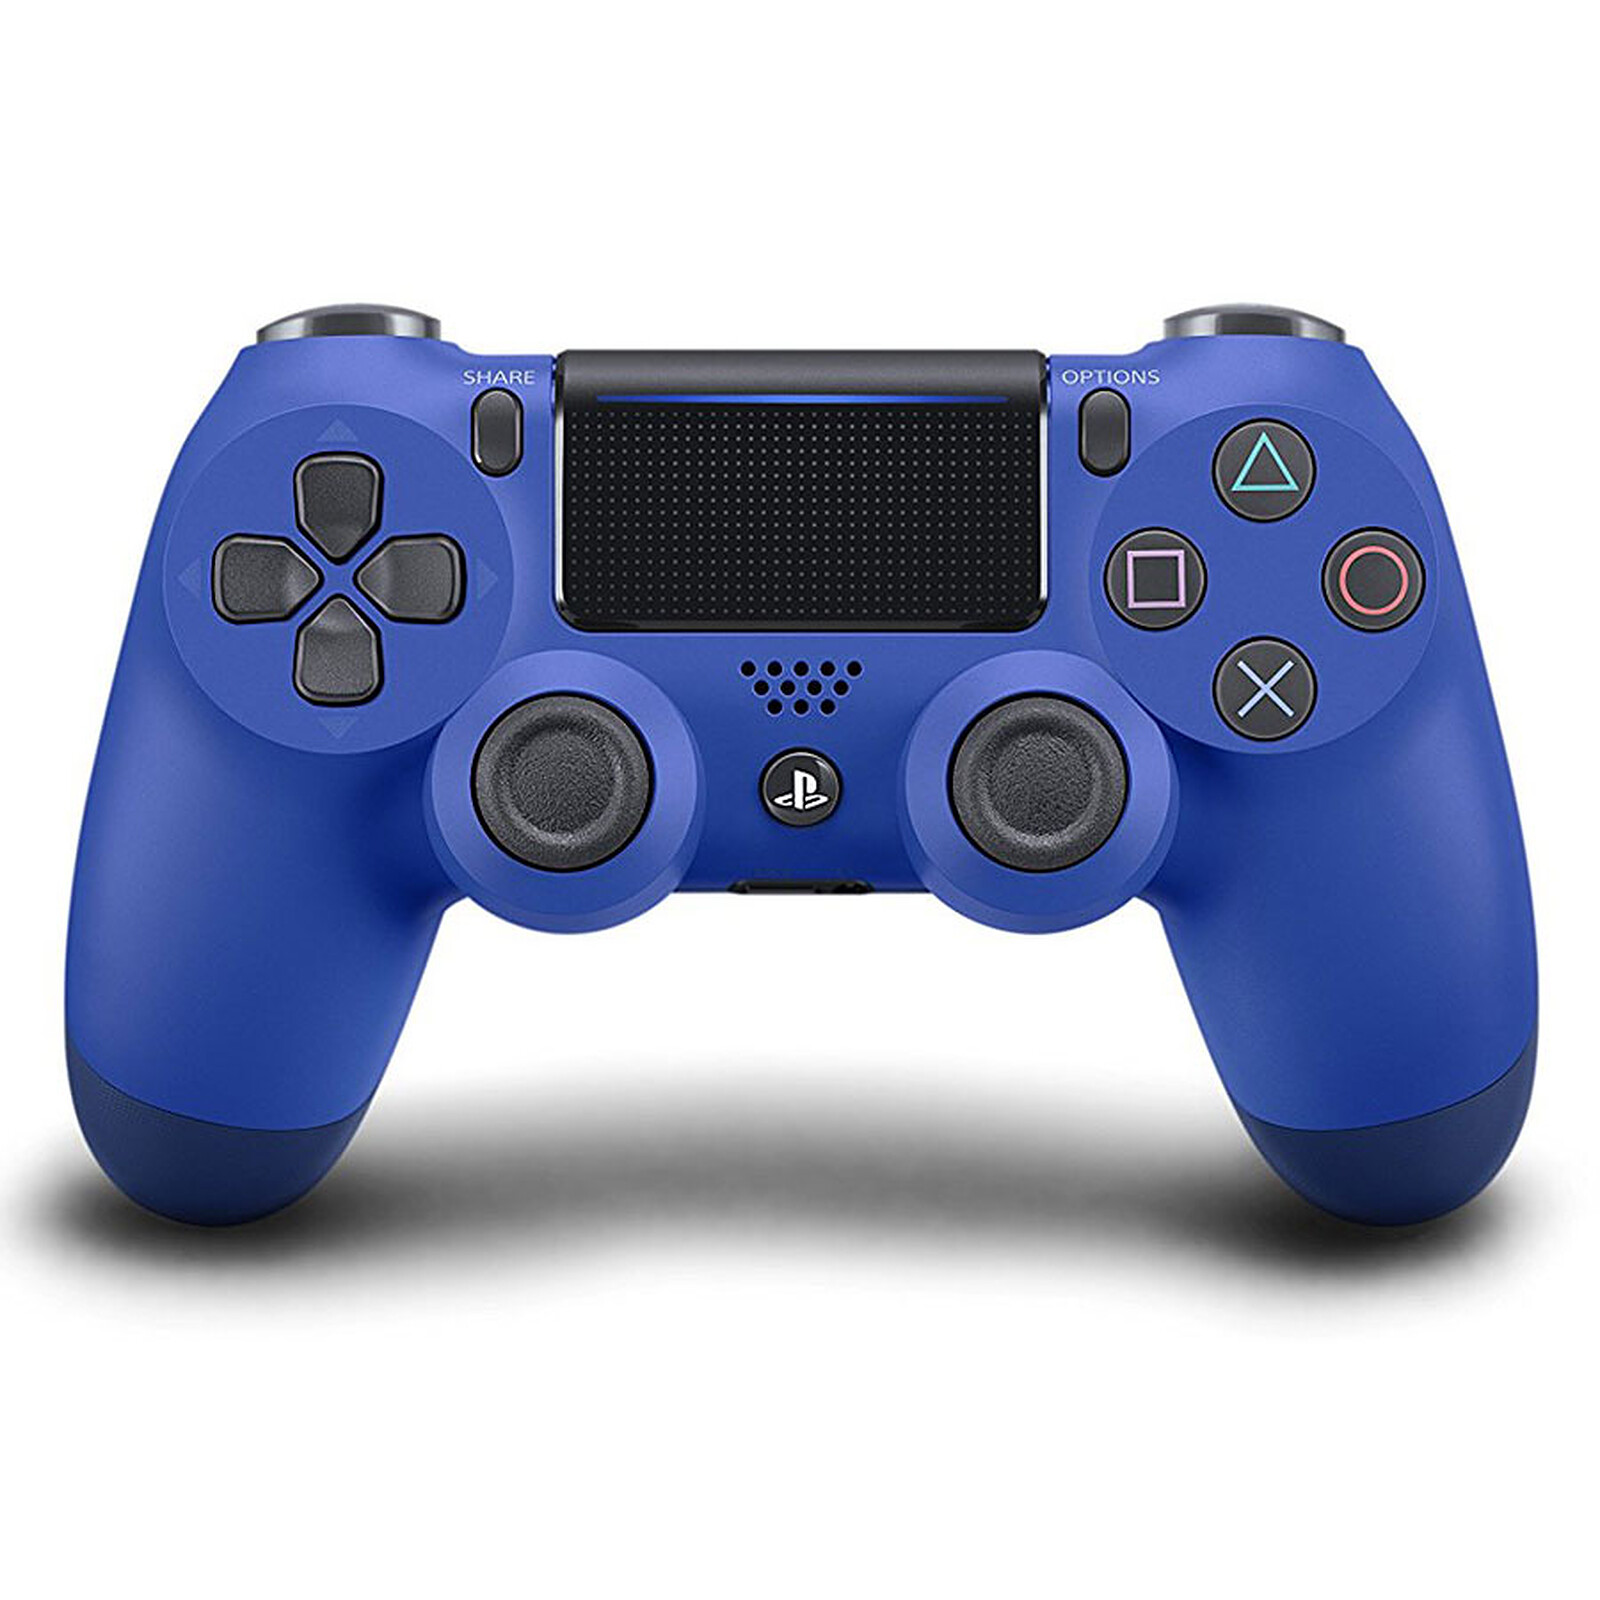 Sony DualShock 4 v2 (blue) - PS4 accessories - LDLC 3-year